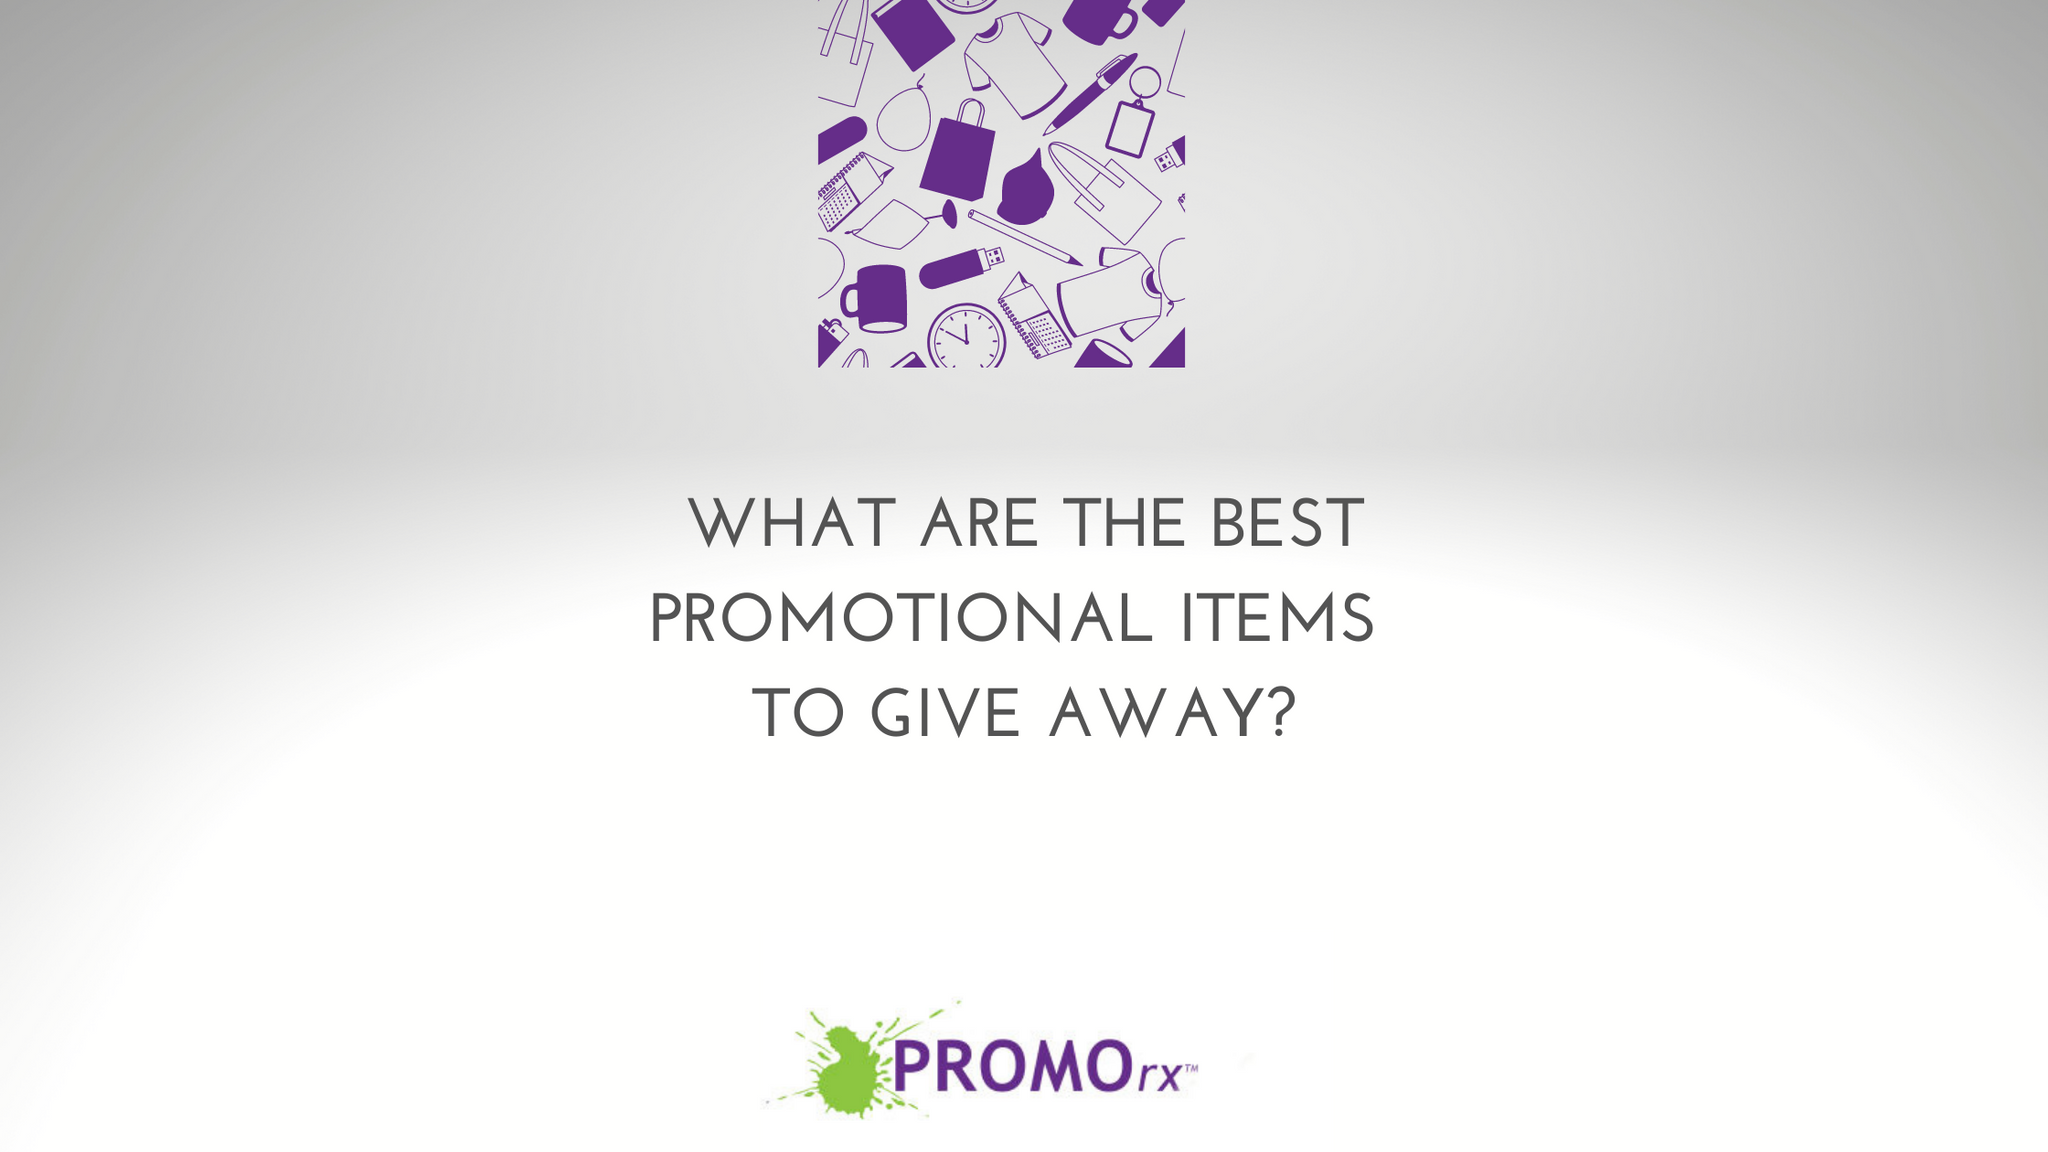 What Are the Best Promotional Items to Give Away?